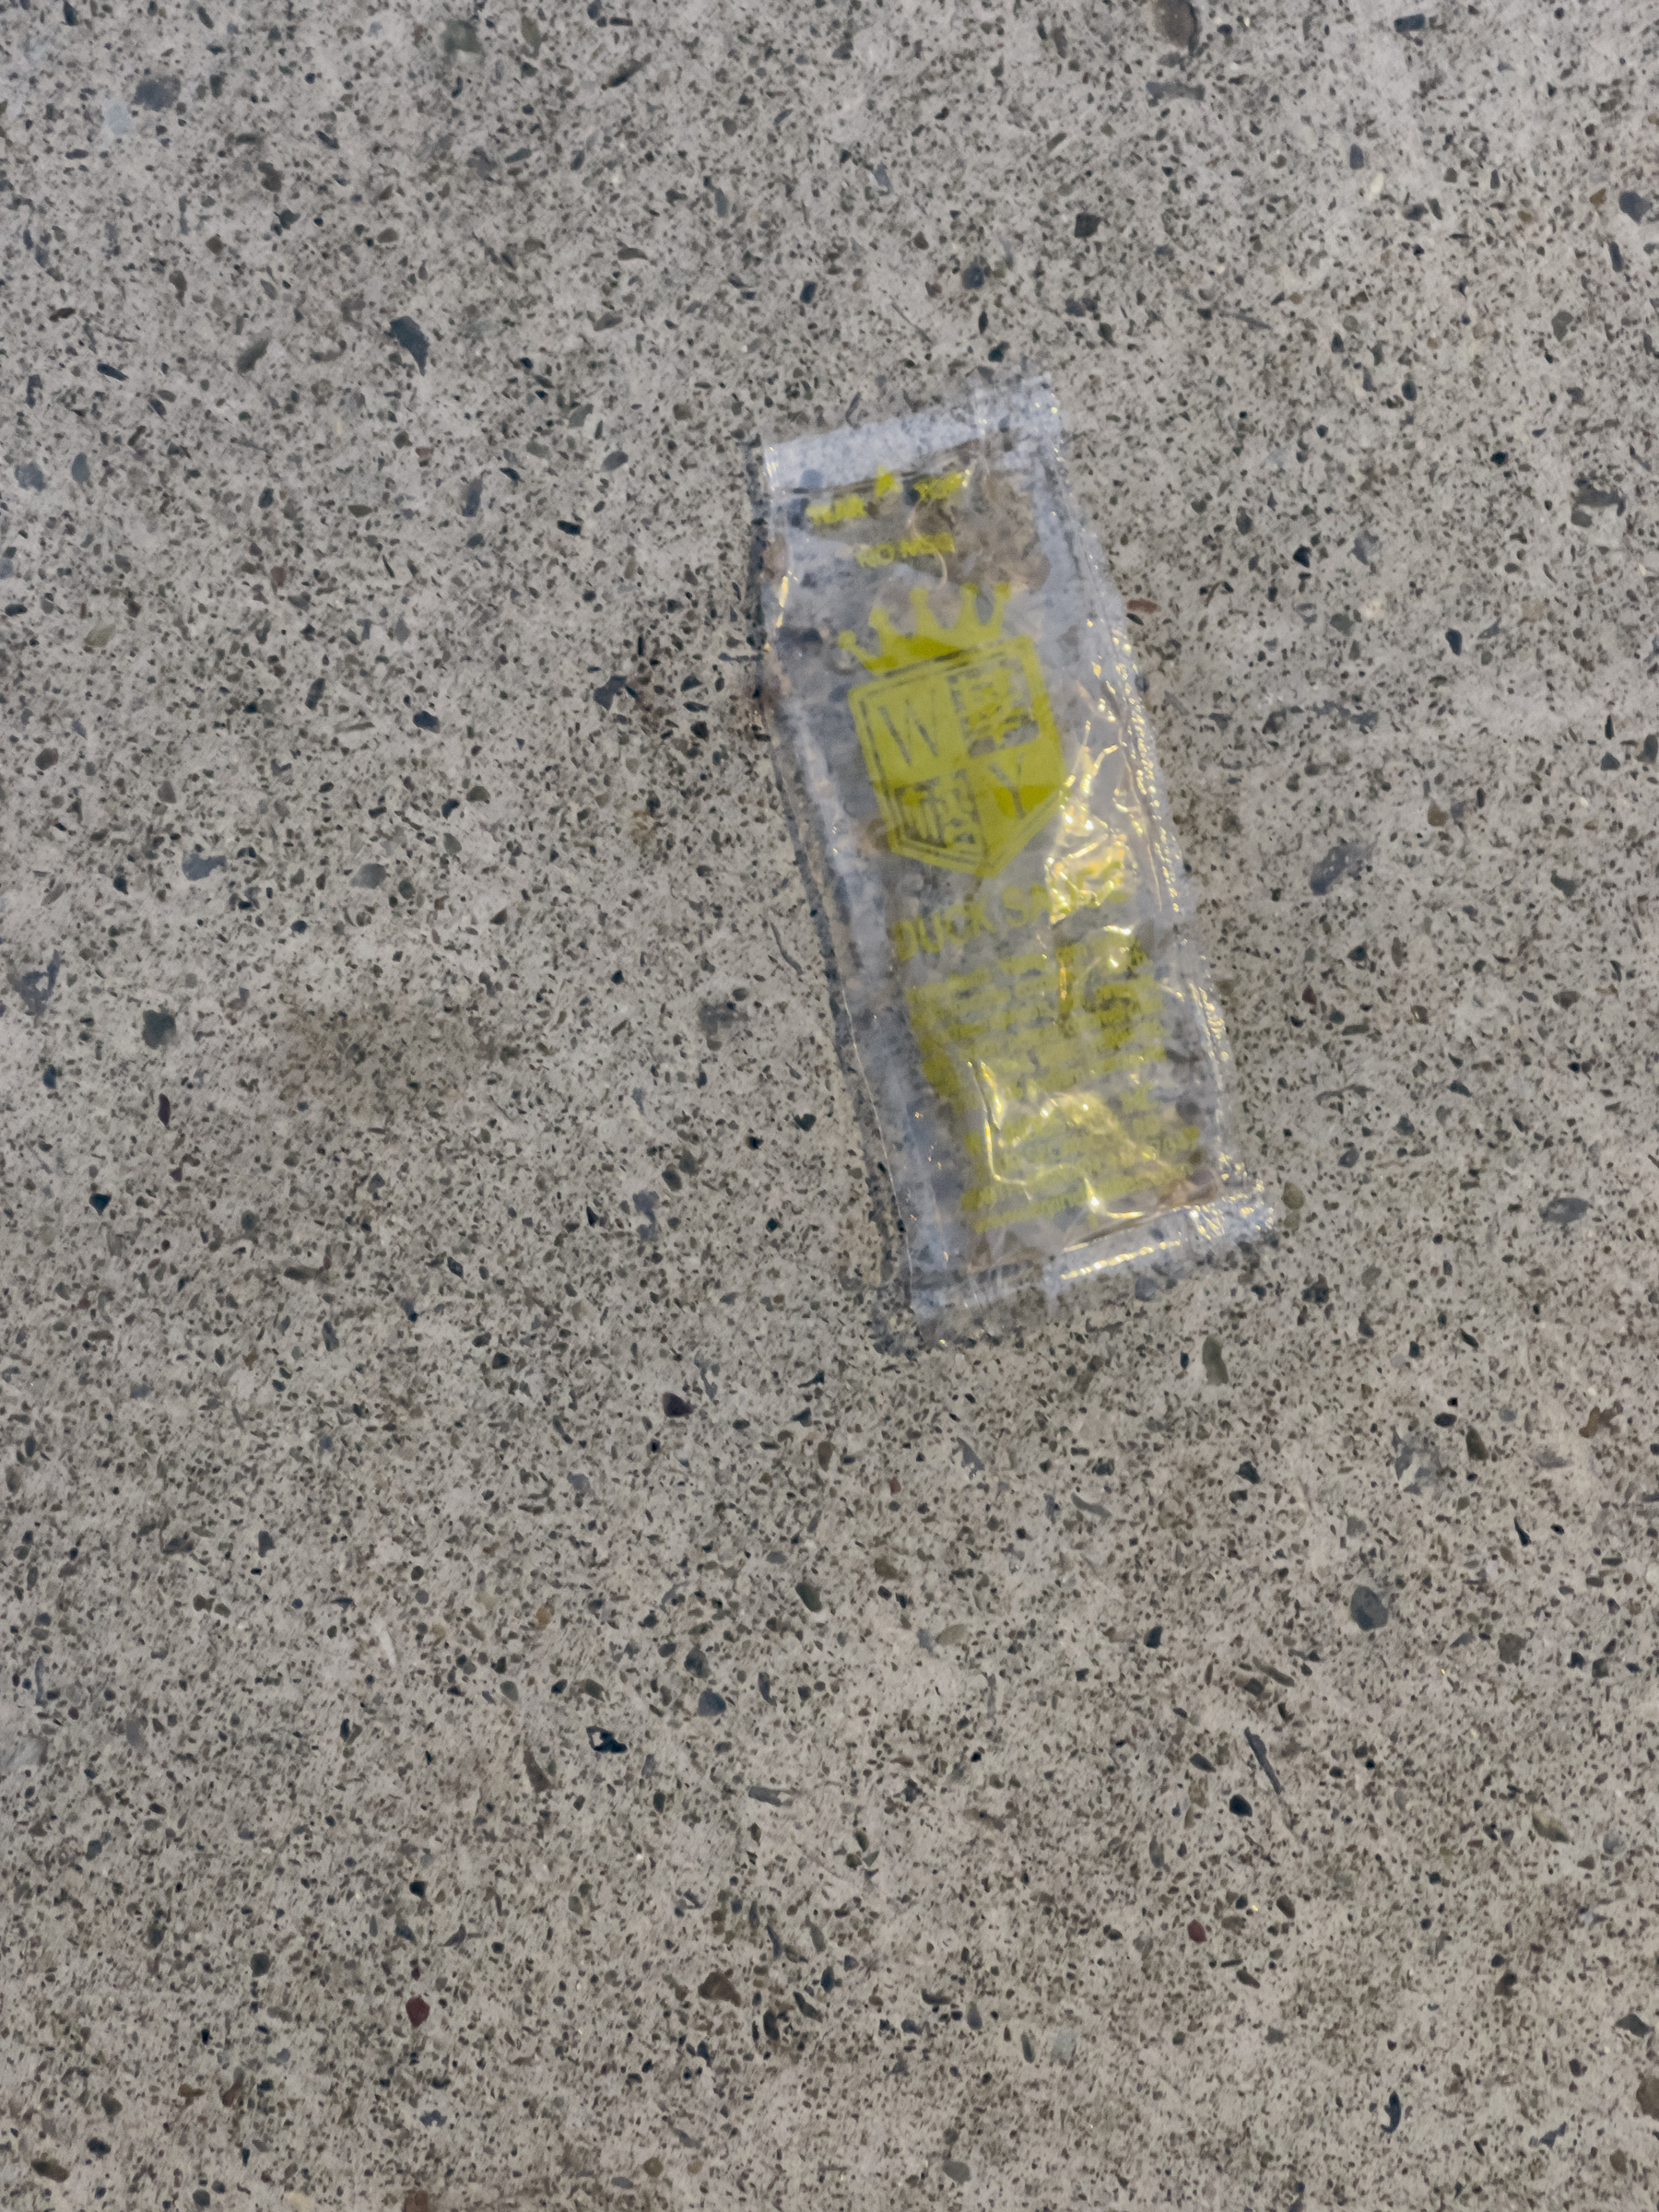 Empty chinese condiment package on concrete pavement.